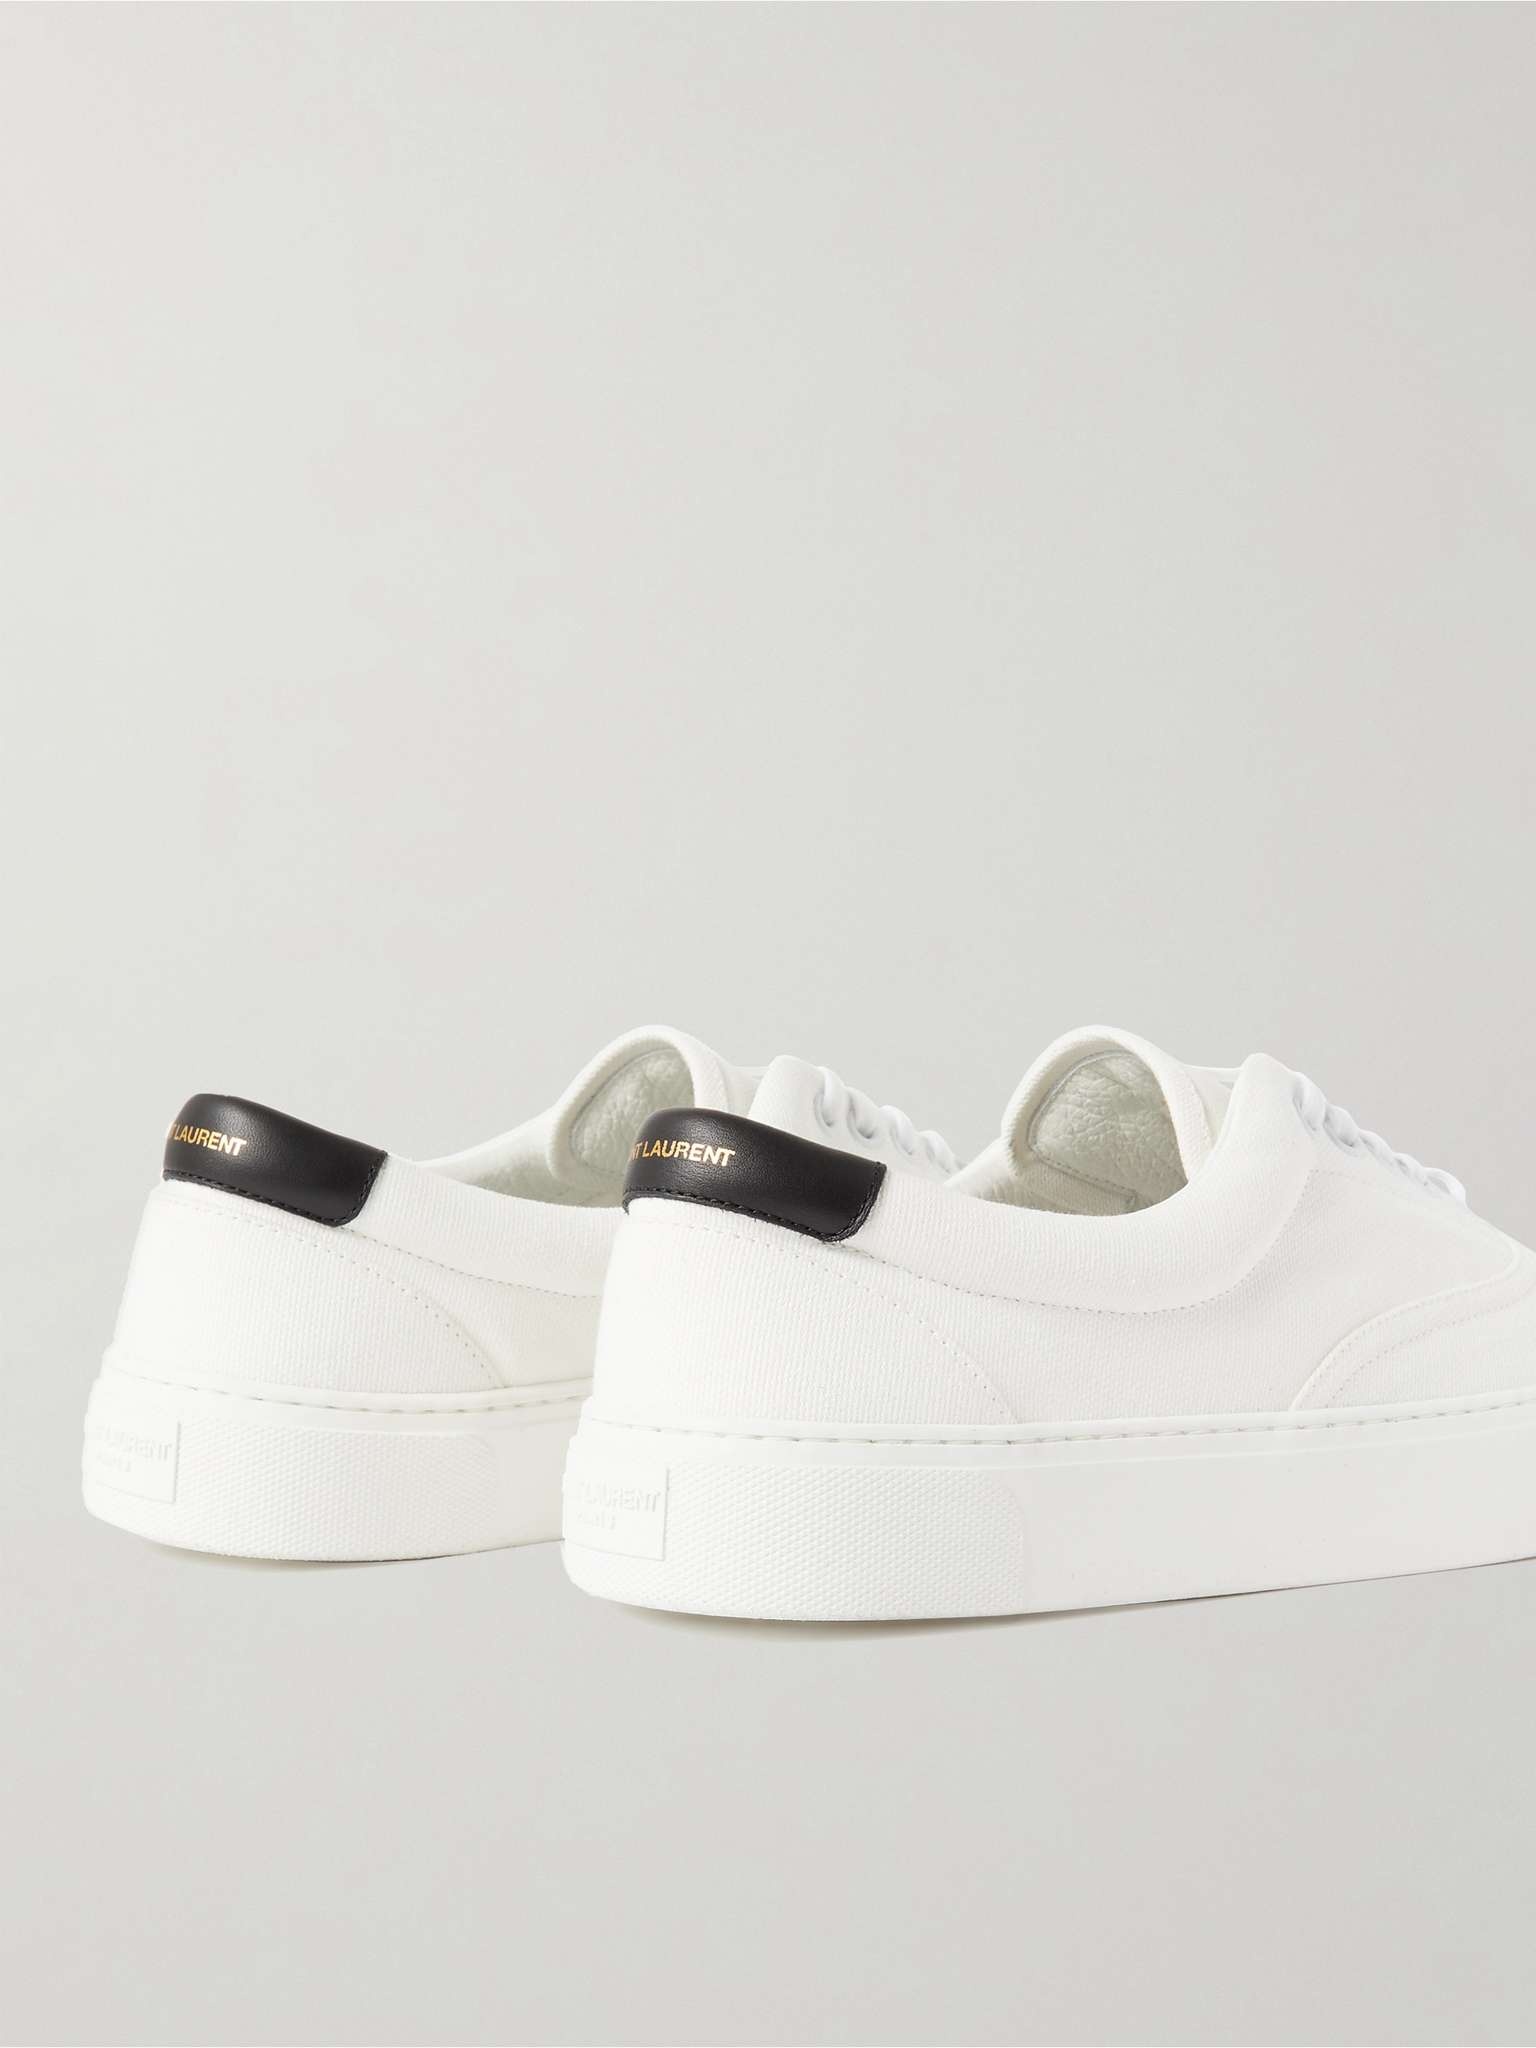 Venice Leather-Trimmed Cotton-Canvas Sneakers - 5